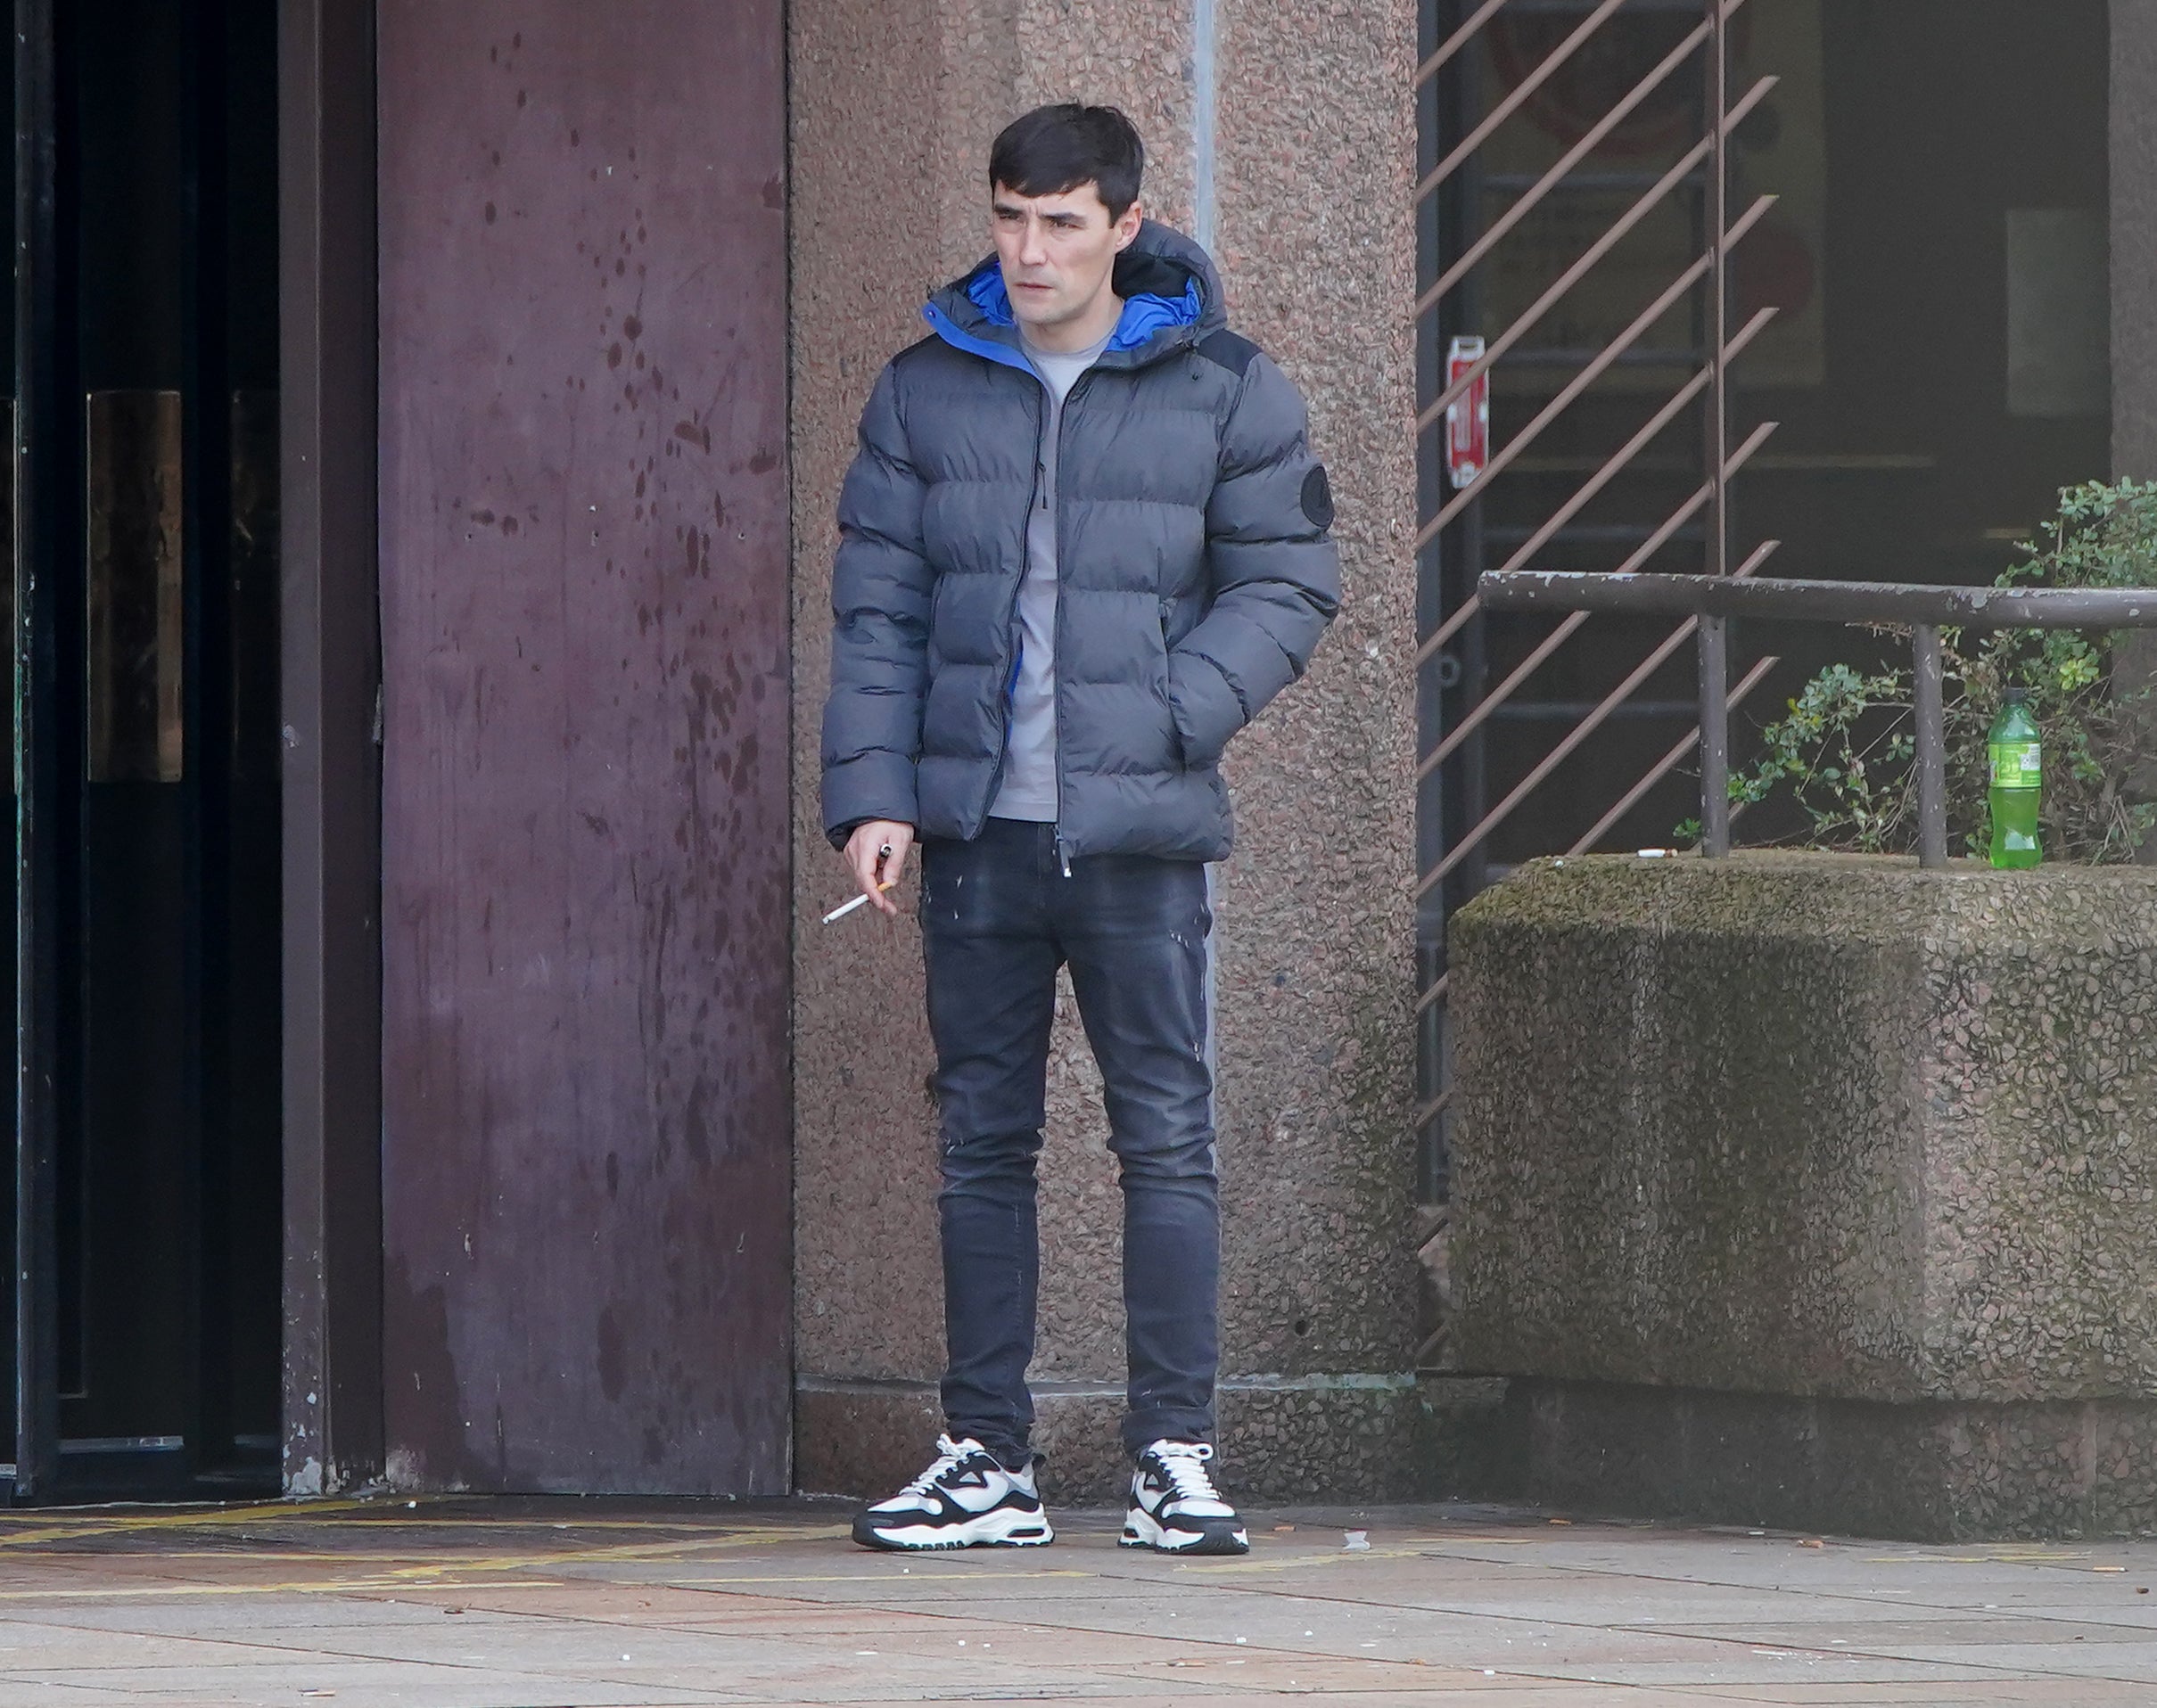 Joseph Nee outside Liverpool Crown Court where he was fined £60 for possessing cannabis